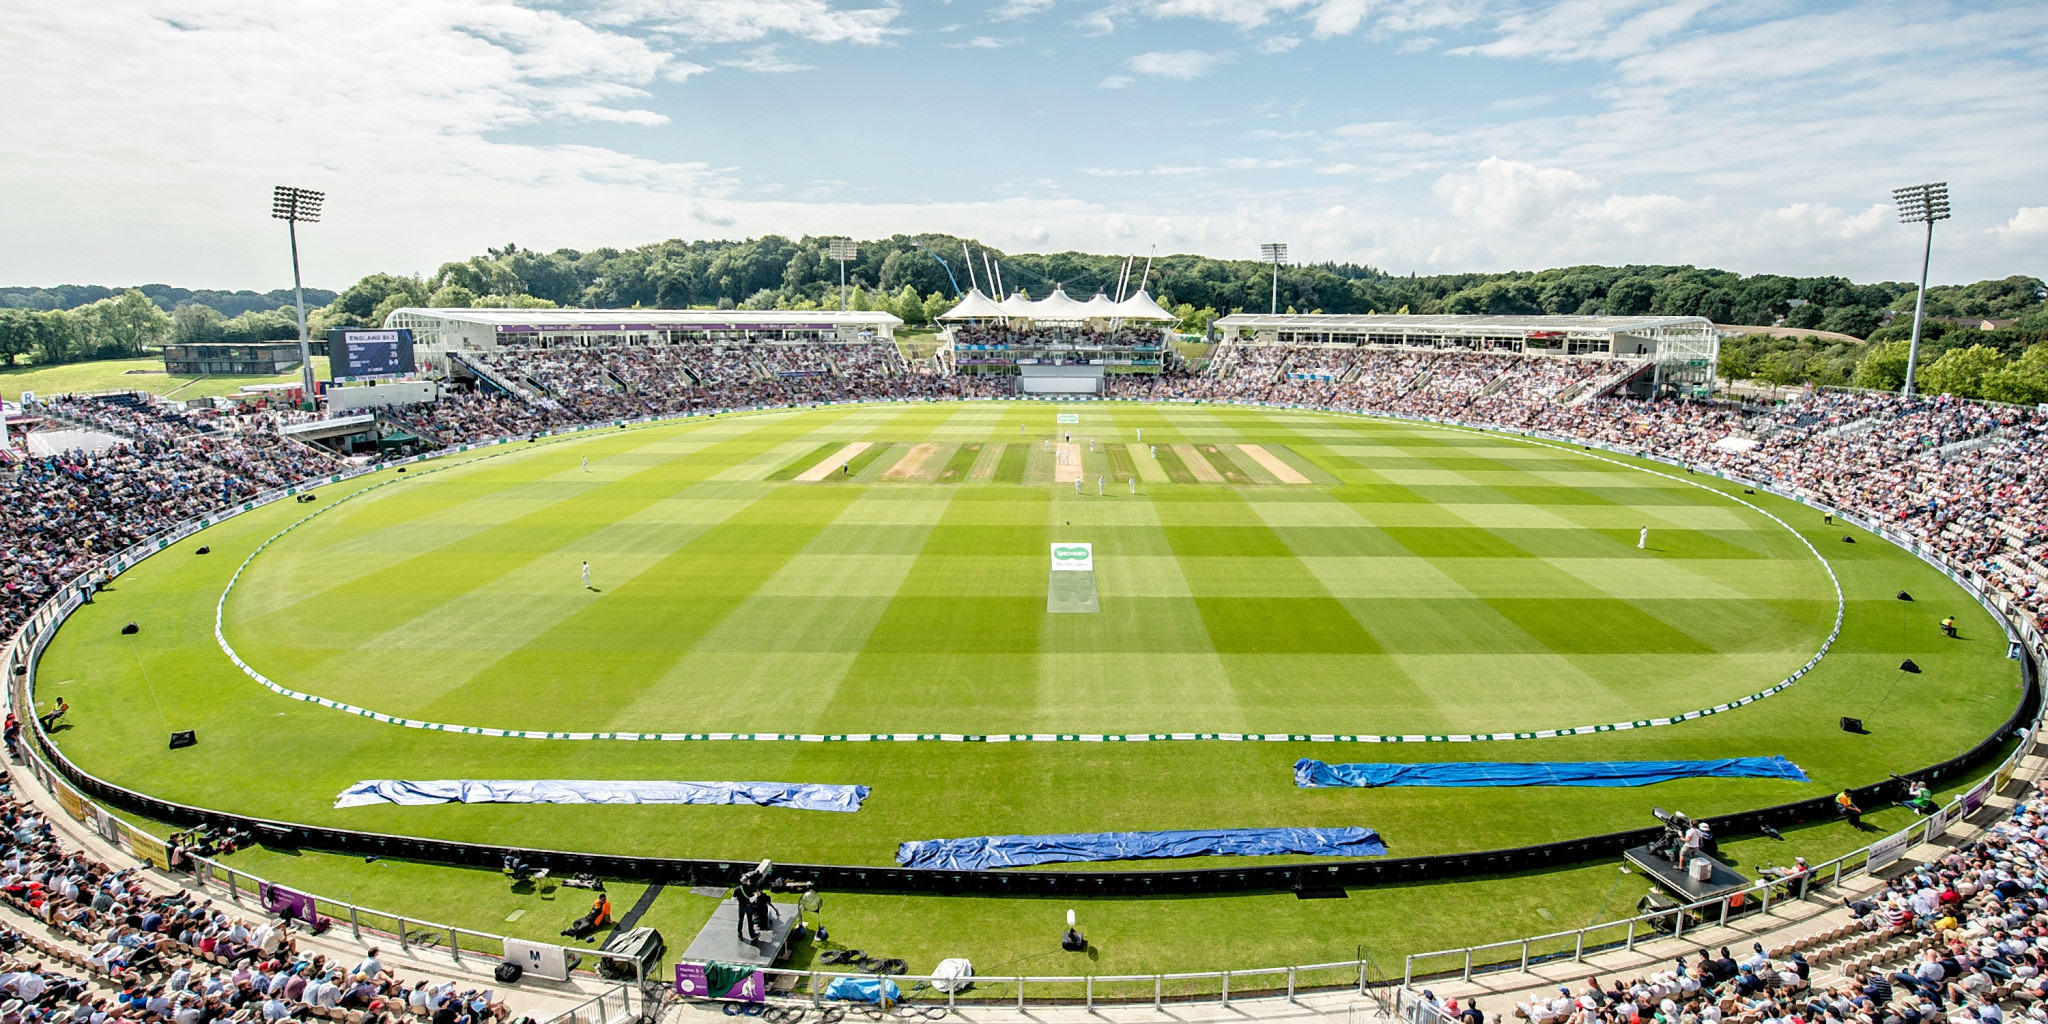 World Test Cricket Championship final to be held at Southampton in "secure bio bubble"